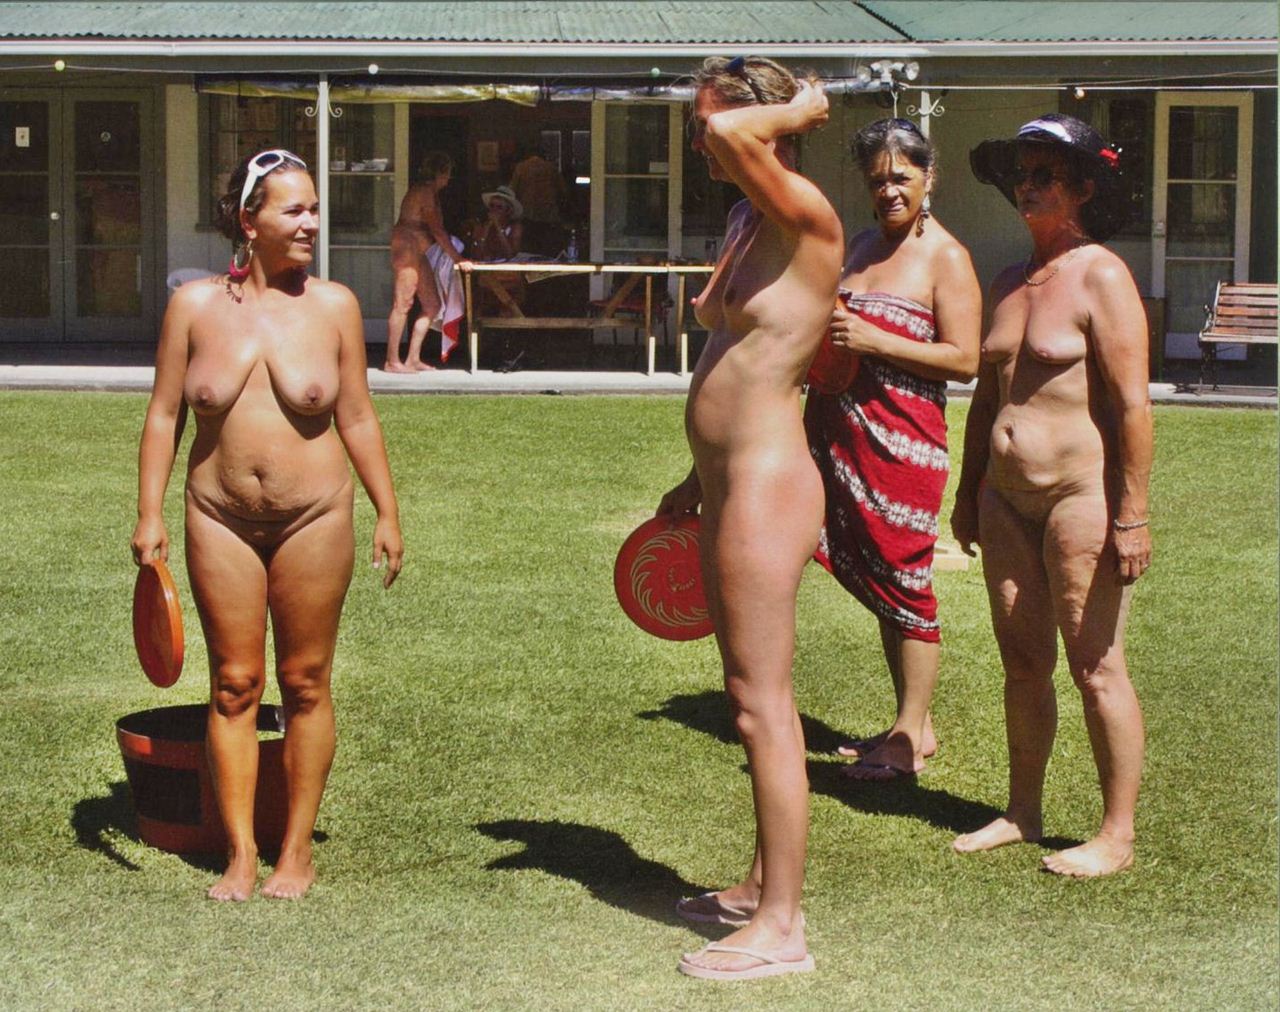 Nudist Photos of the Day 01-18-12.